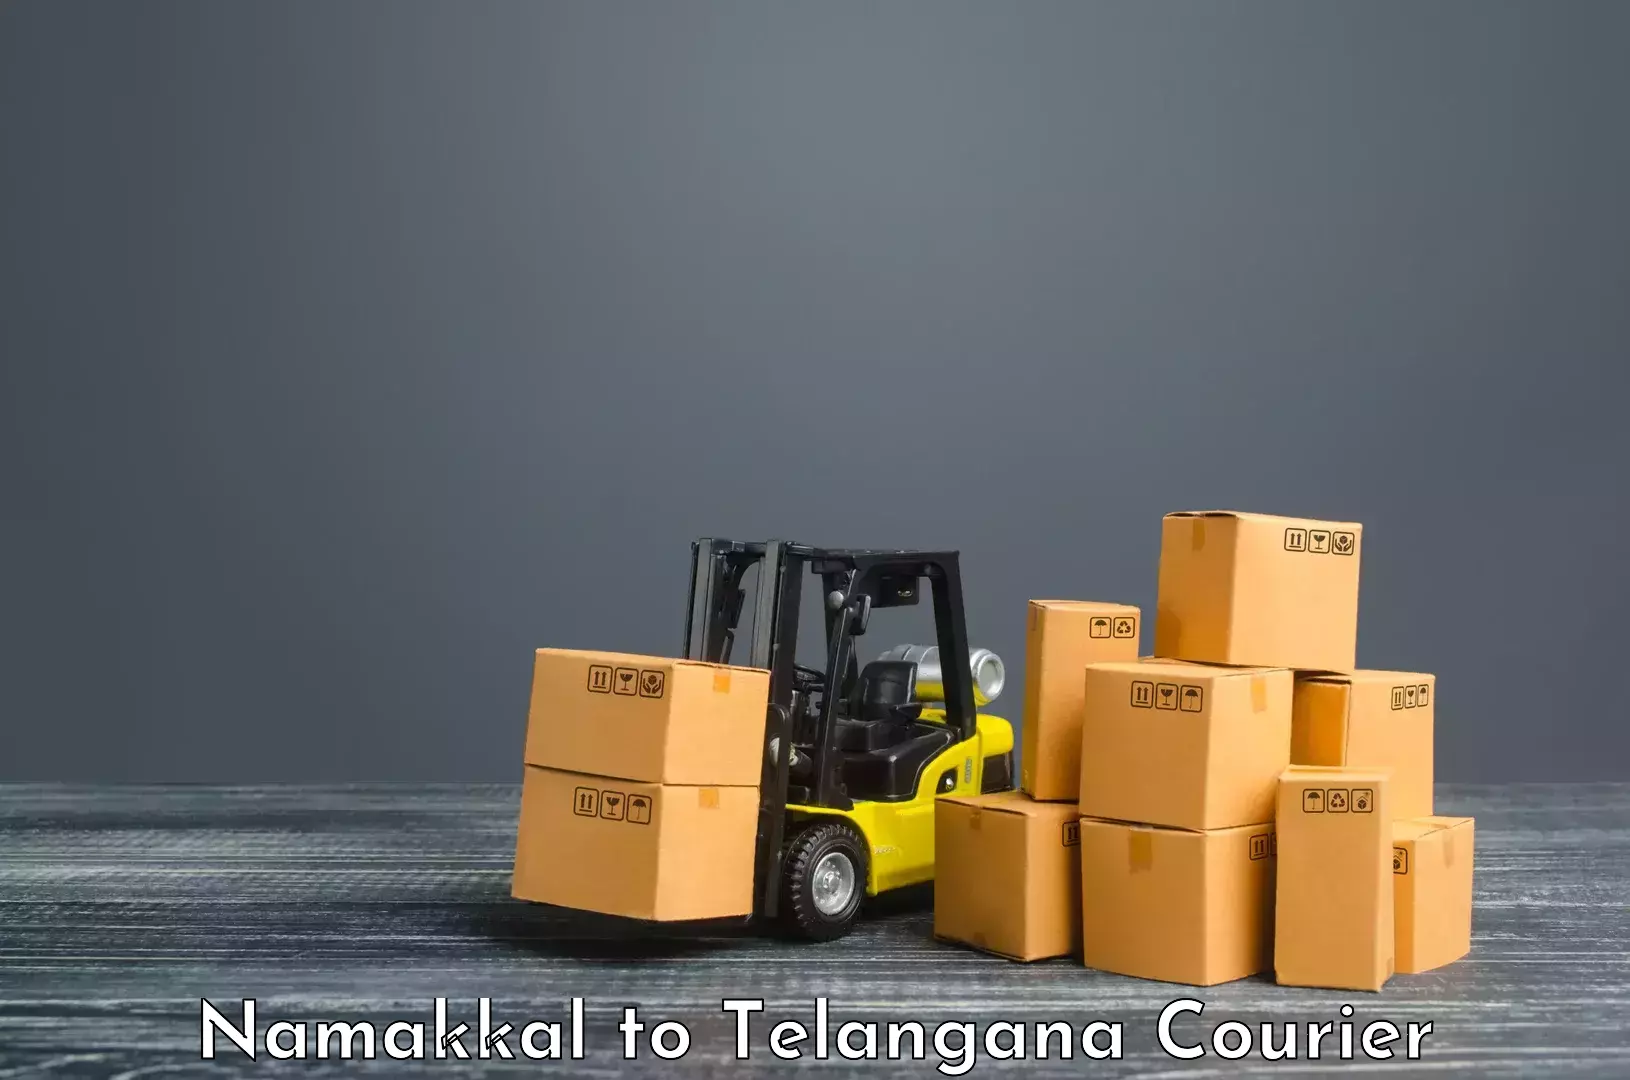 Global courier networks Namakkal to Sangareddy